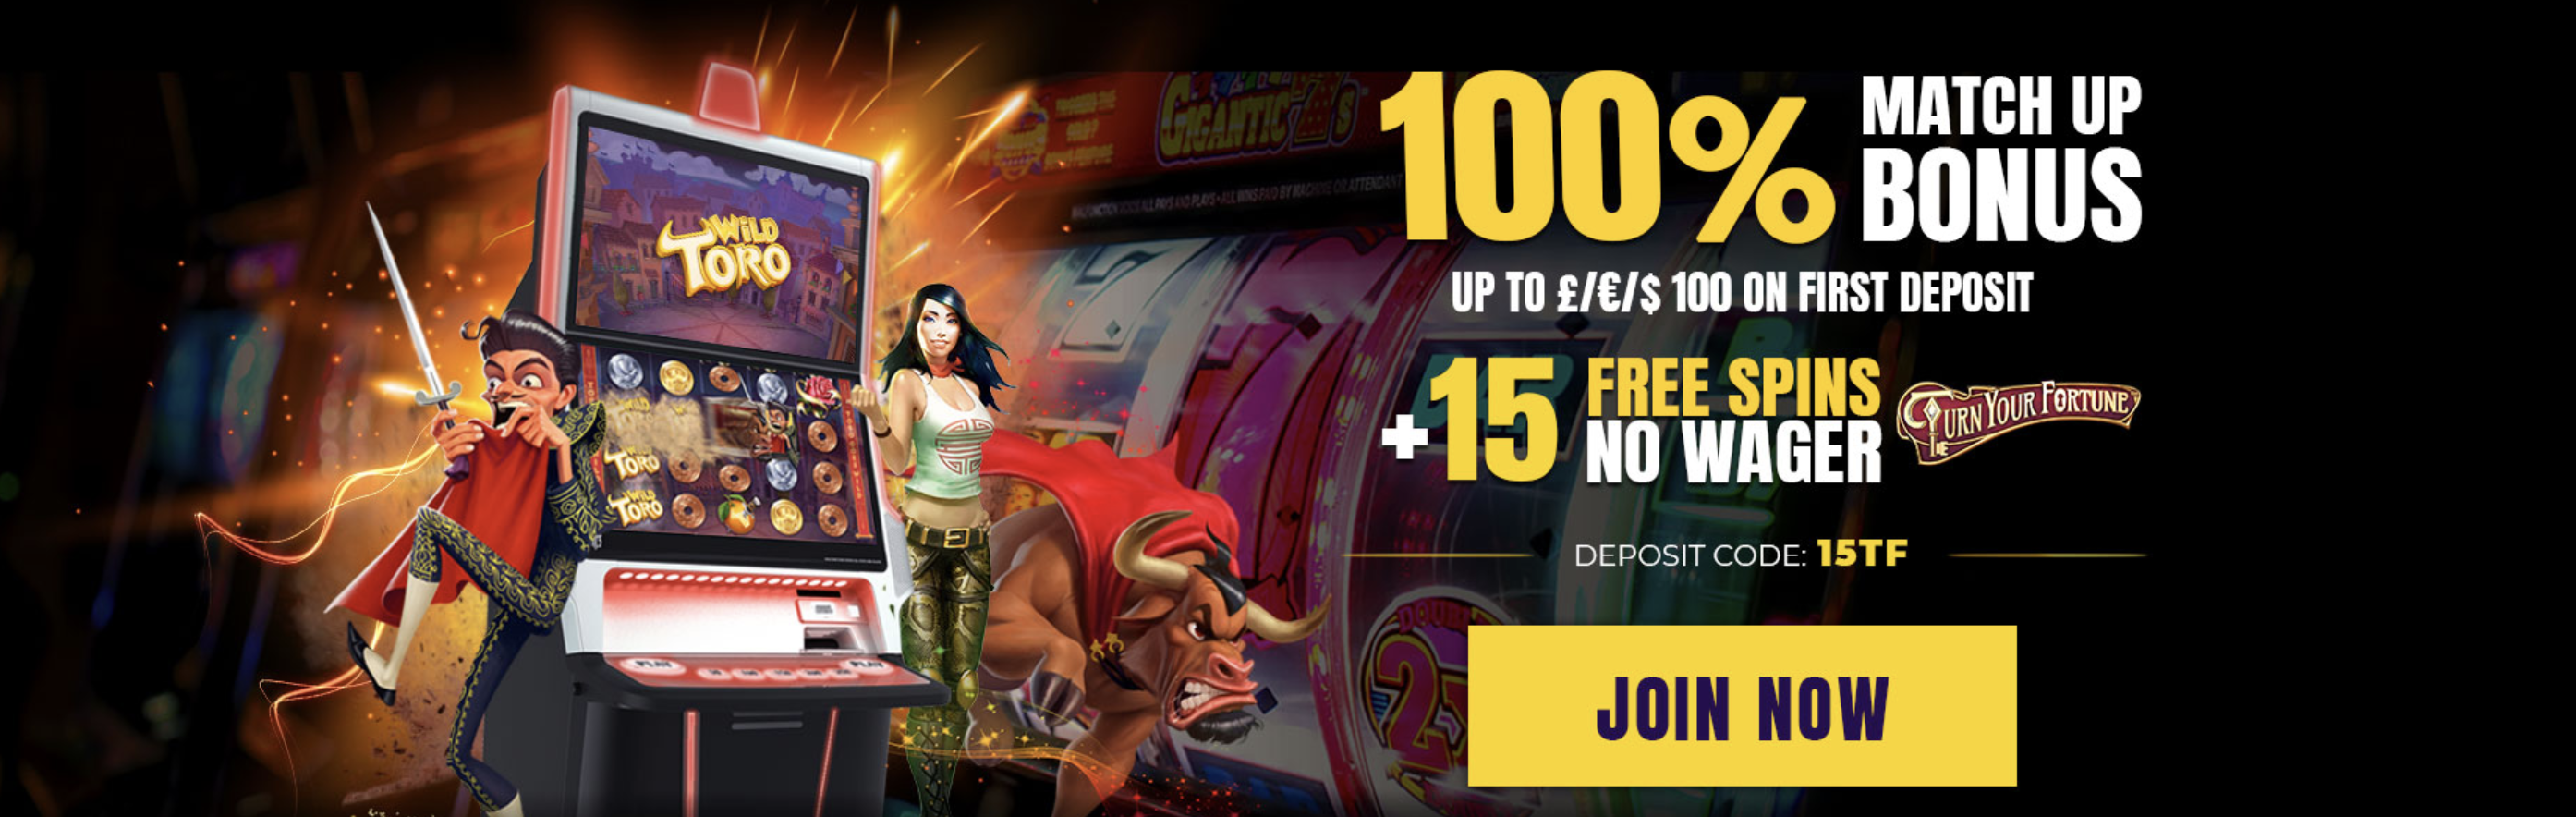 Video Slots Free Spins Code